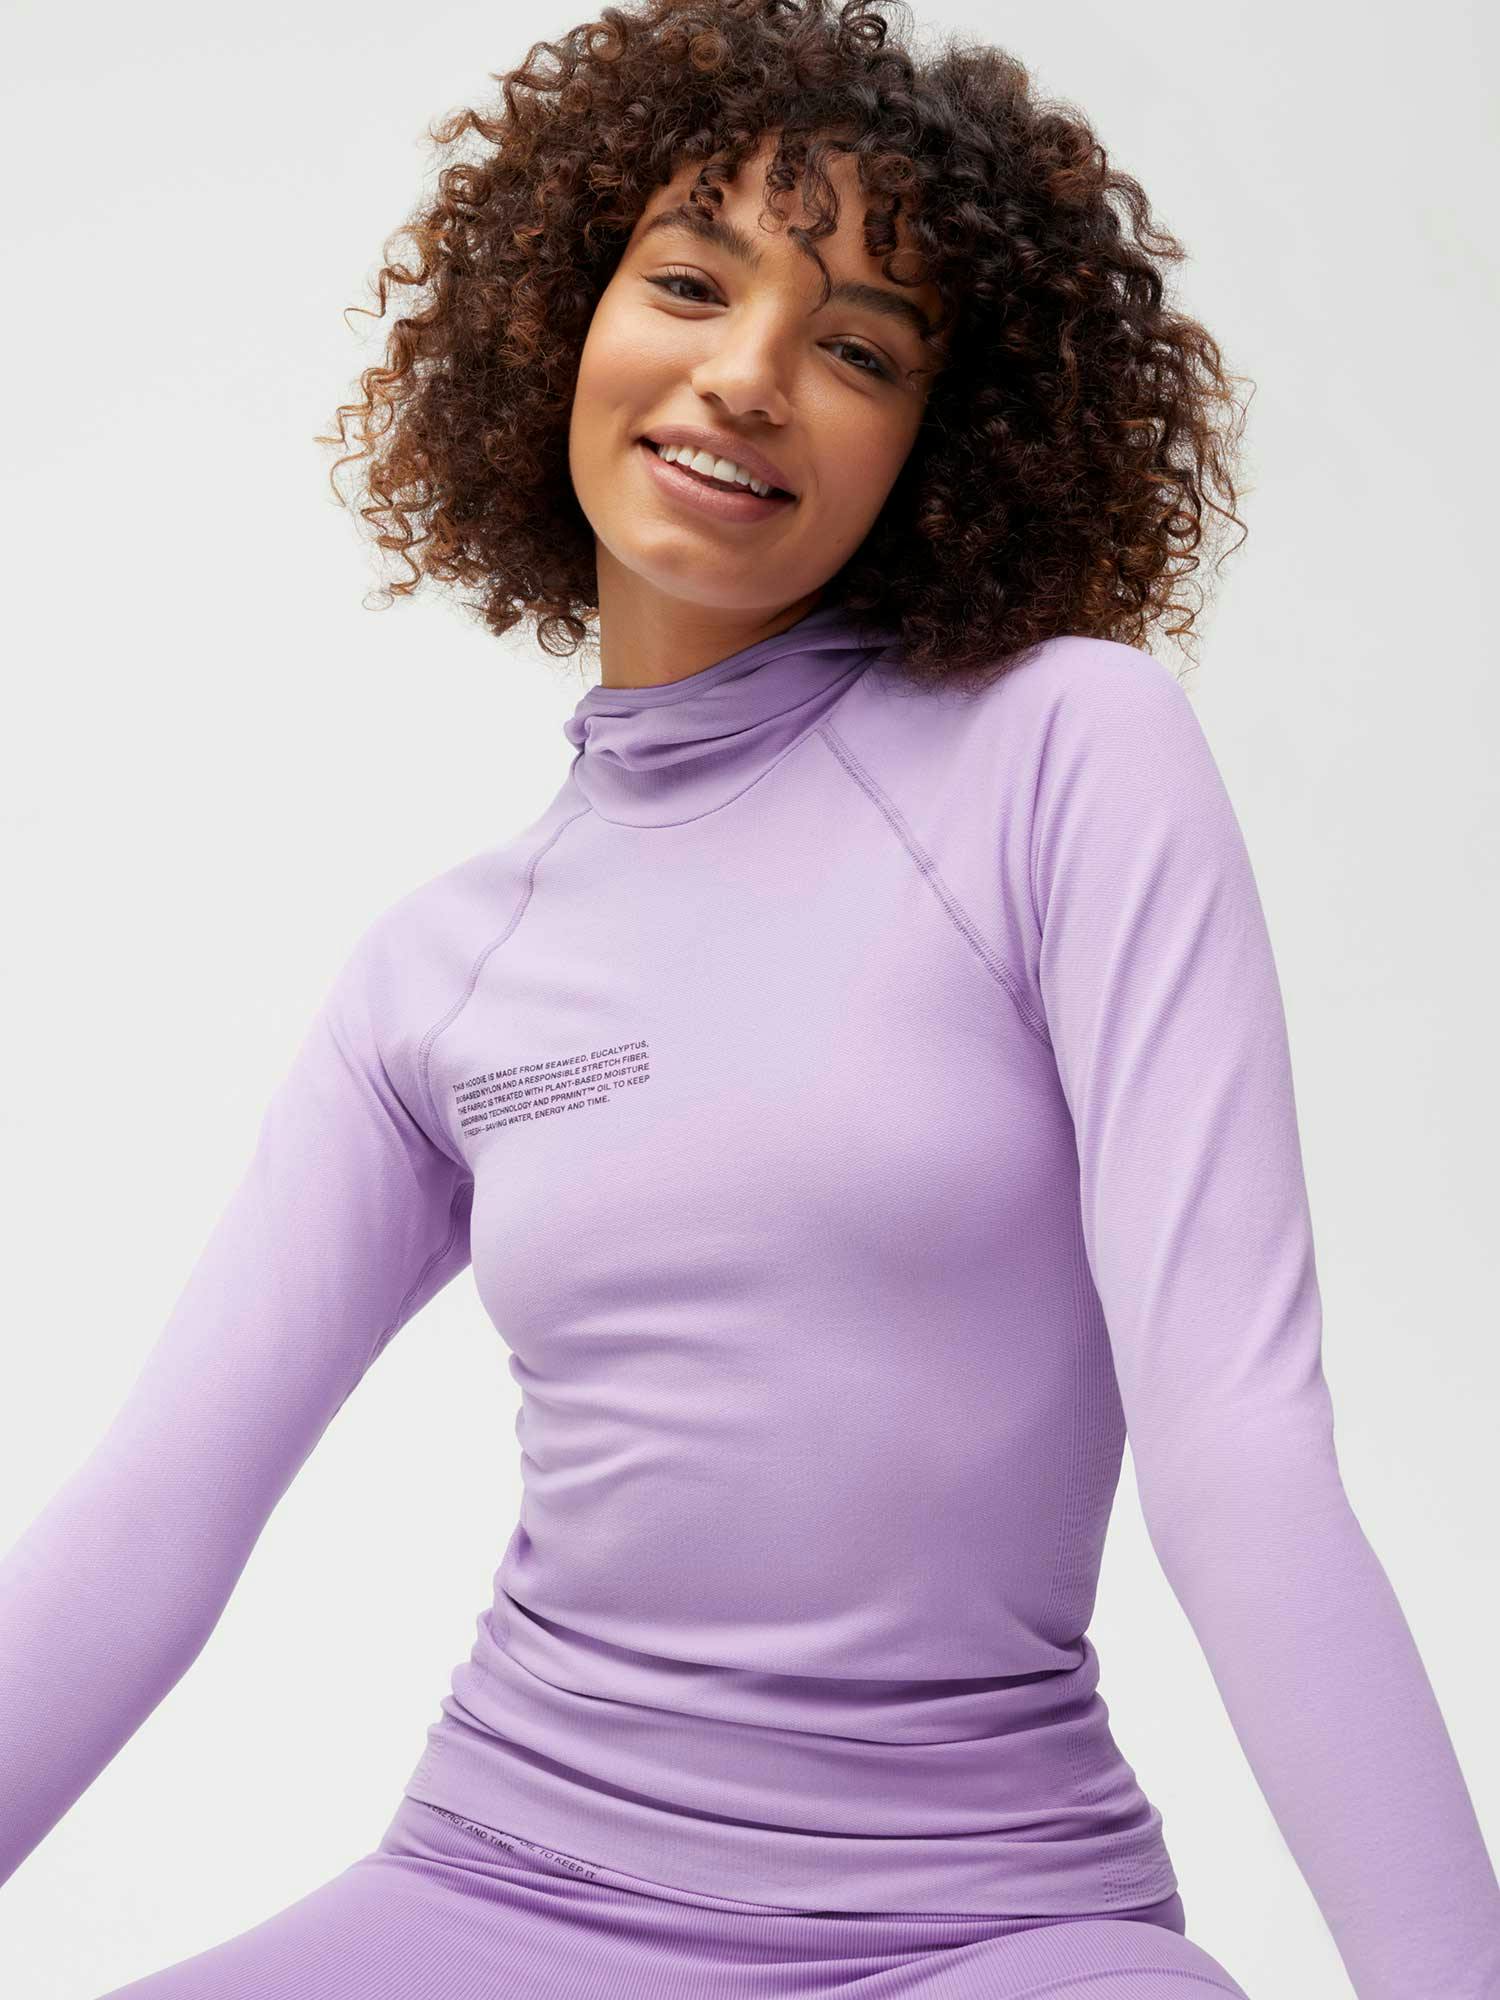 https://cdn.shopify.com/s/files/1/0035/1309/0115/products/Activewear-Womens-Hoodie-Orchid-Purple-3.jpg?v=1662475882